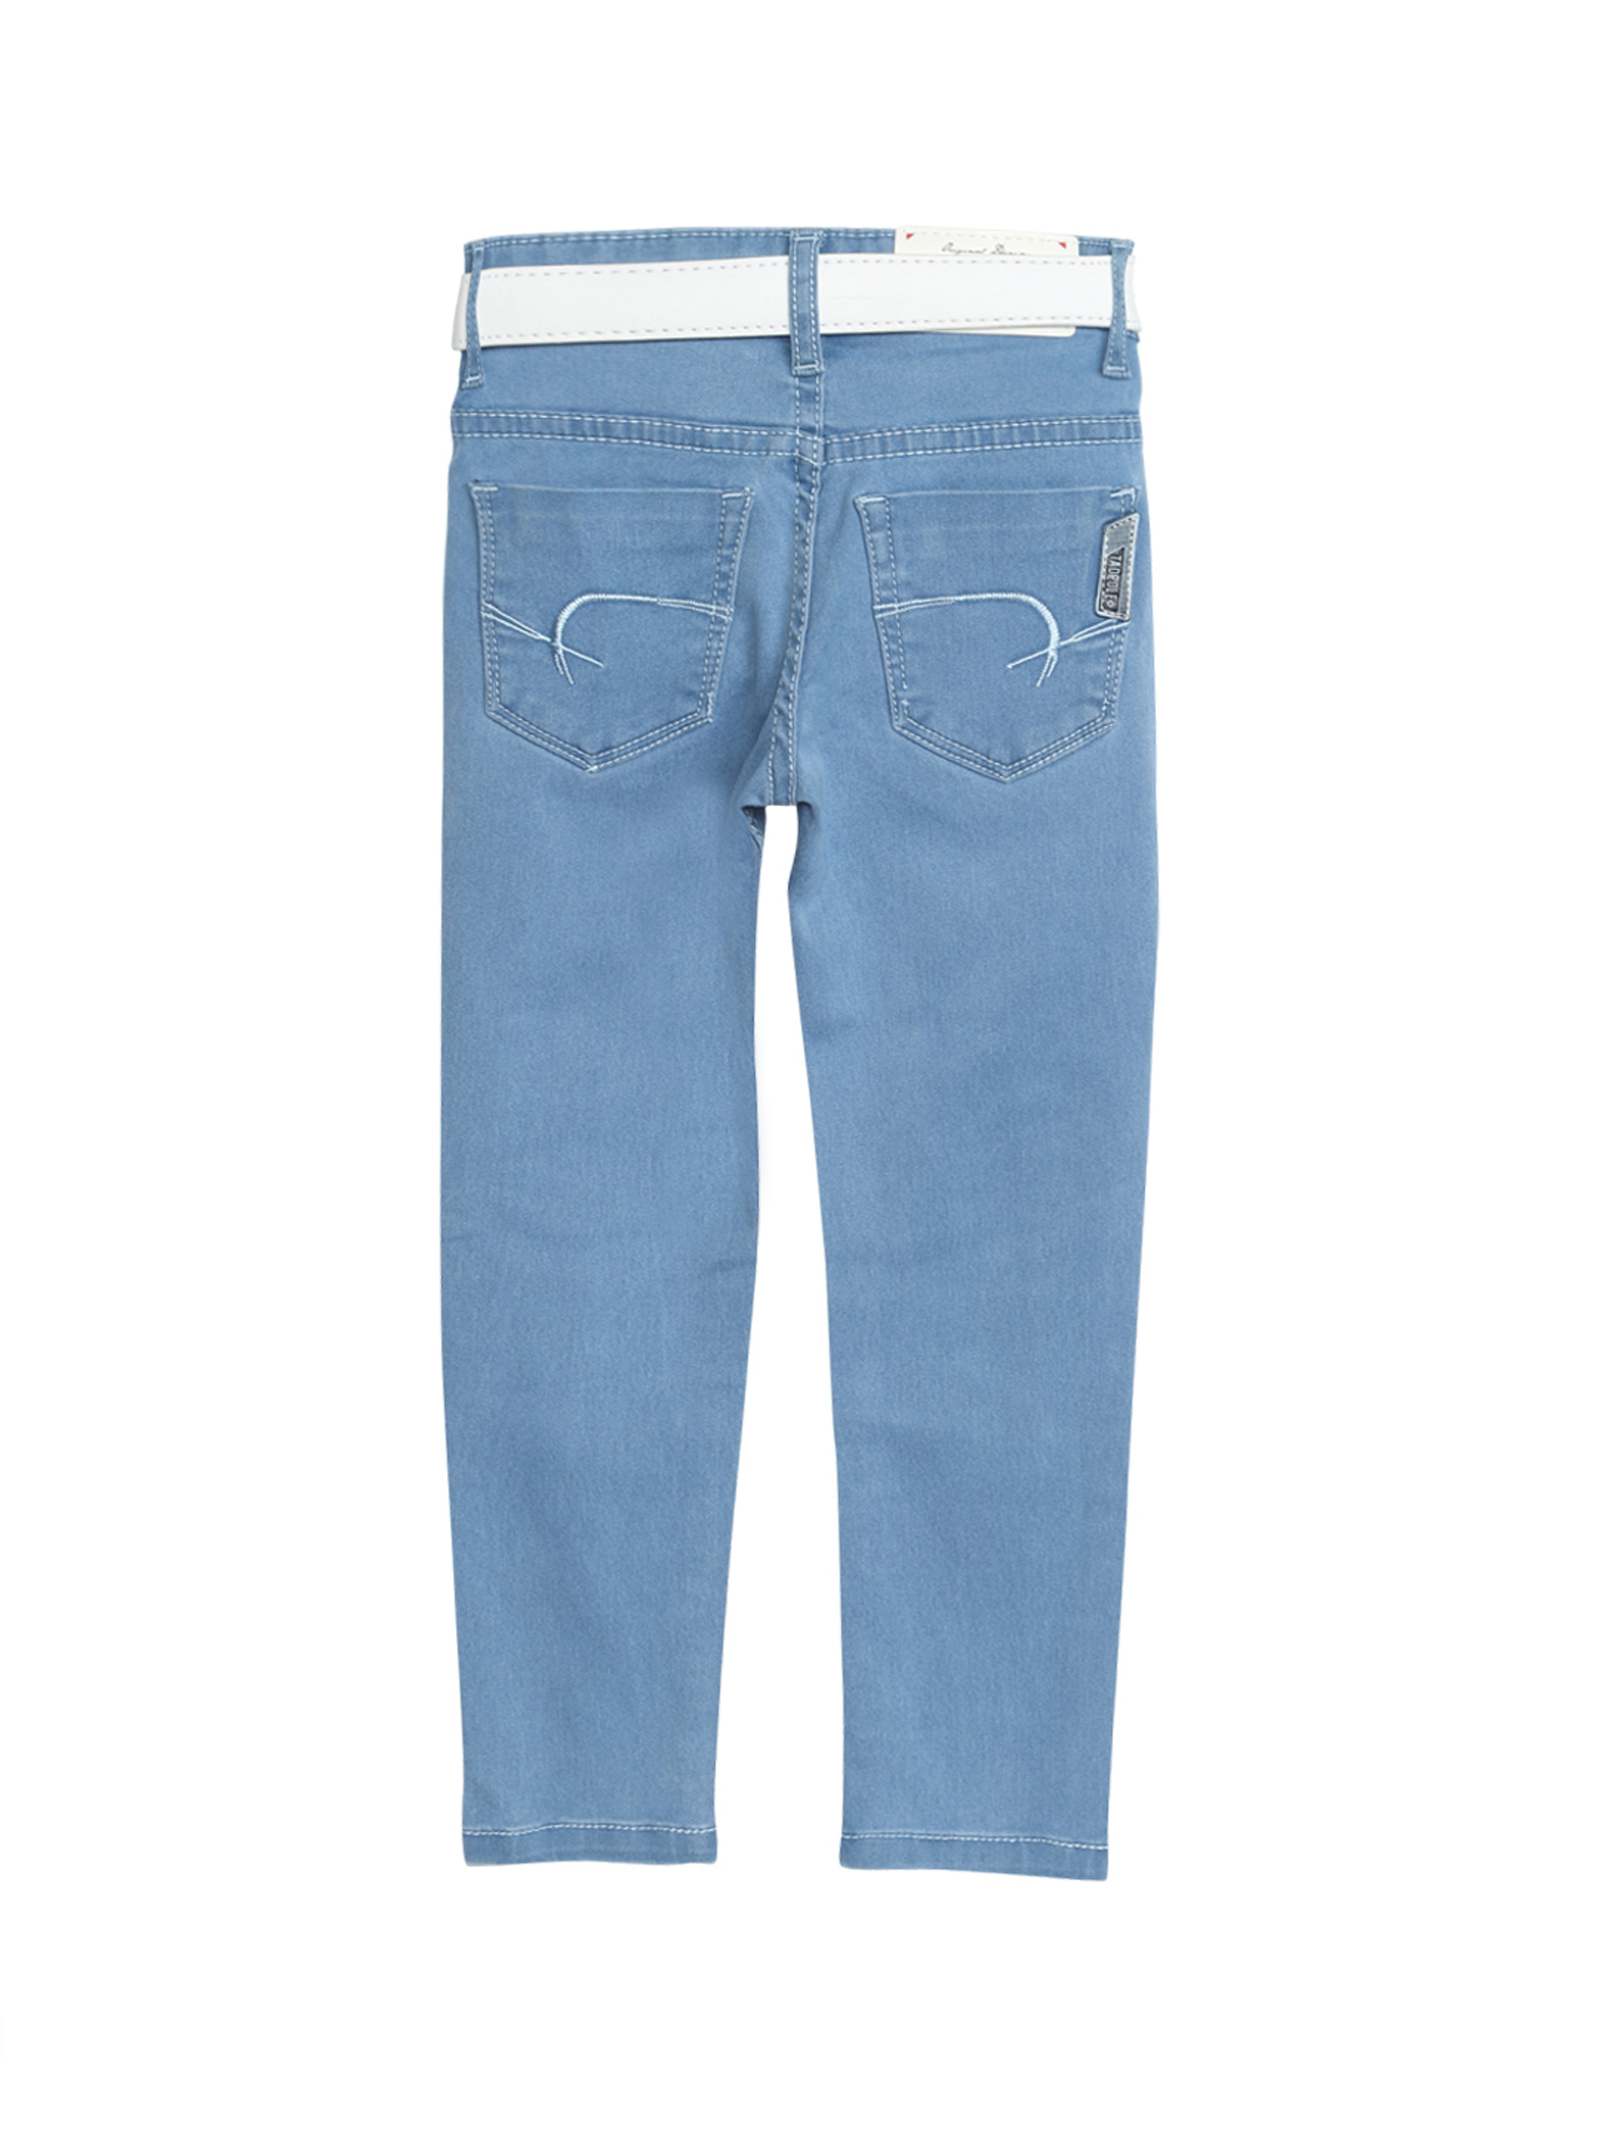 Buy Tadpole Boy'S Blue Cotton Casual Washed Jeans Online @ ₹849 from ...